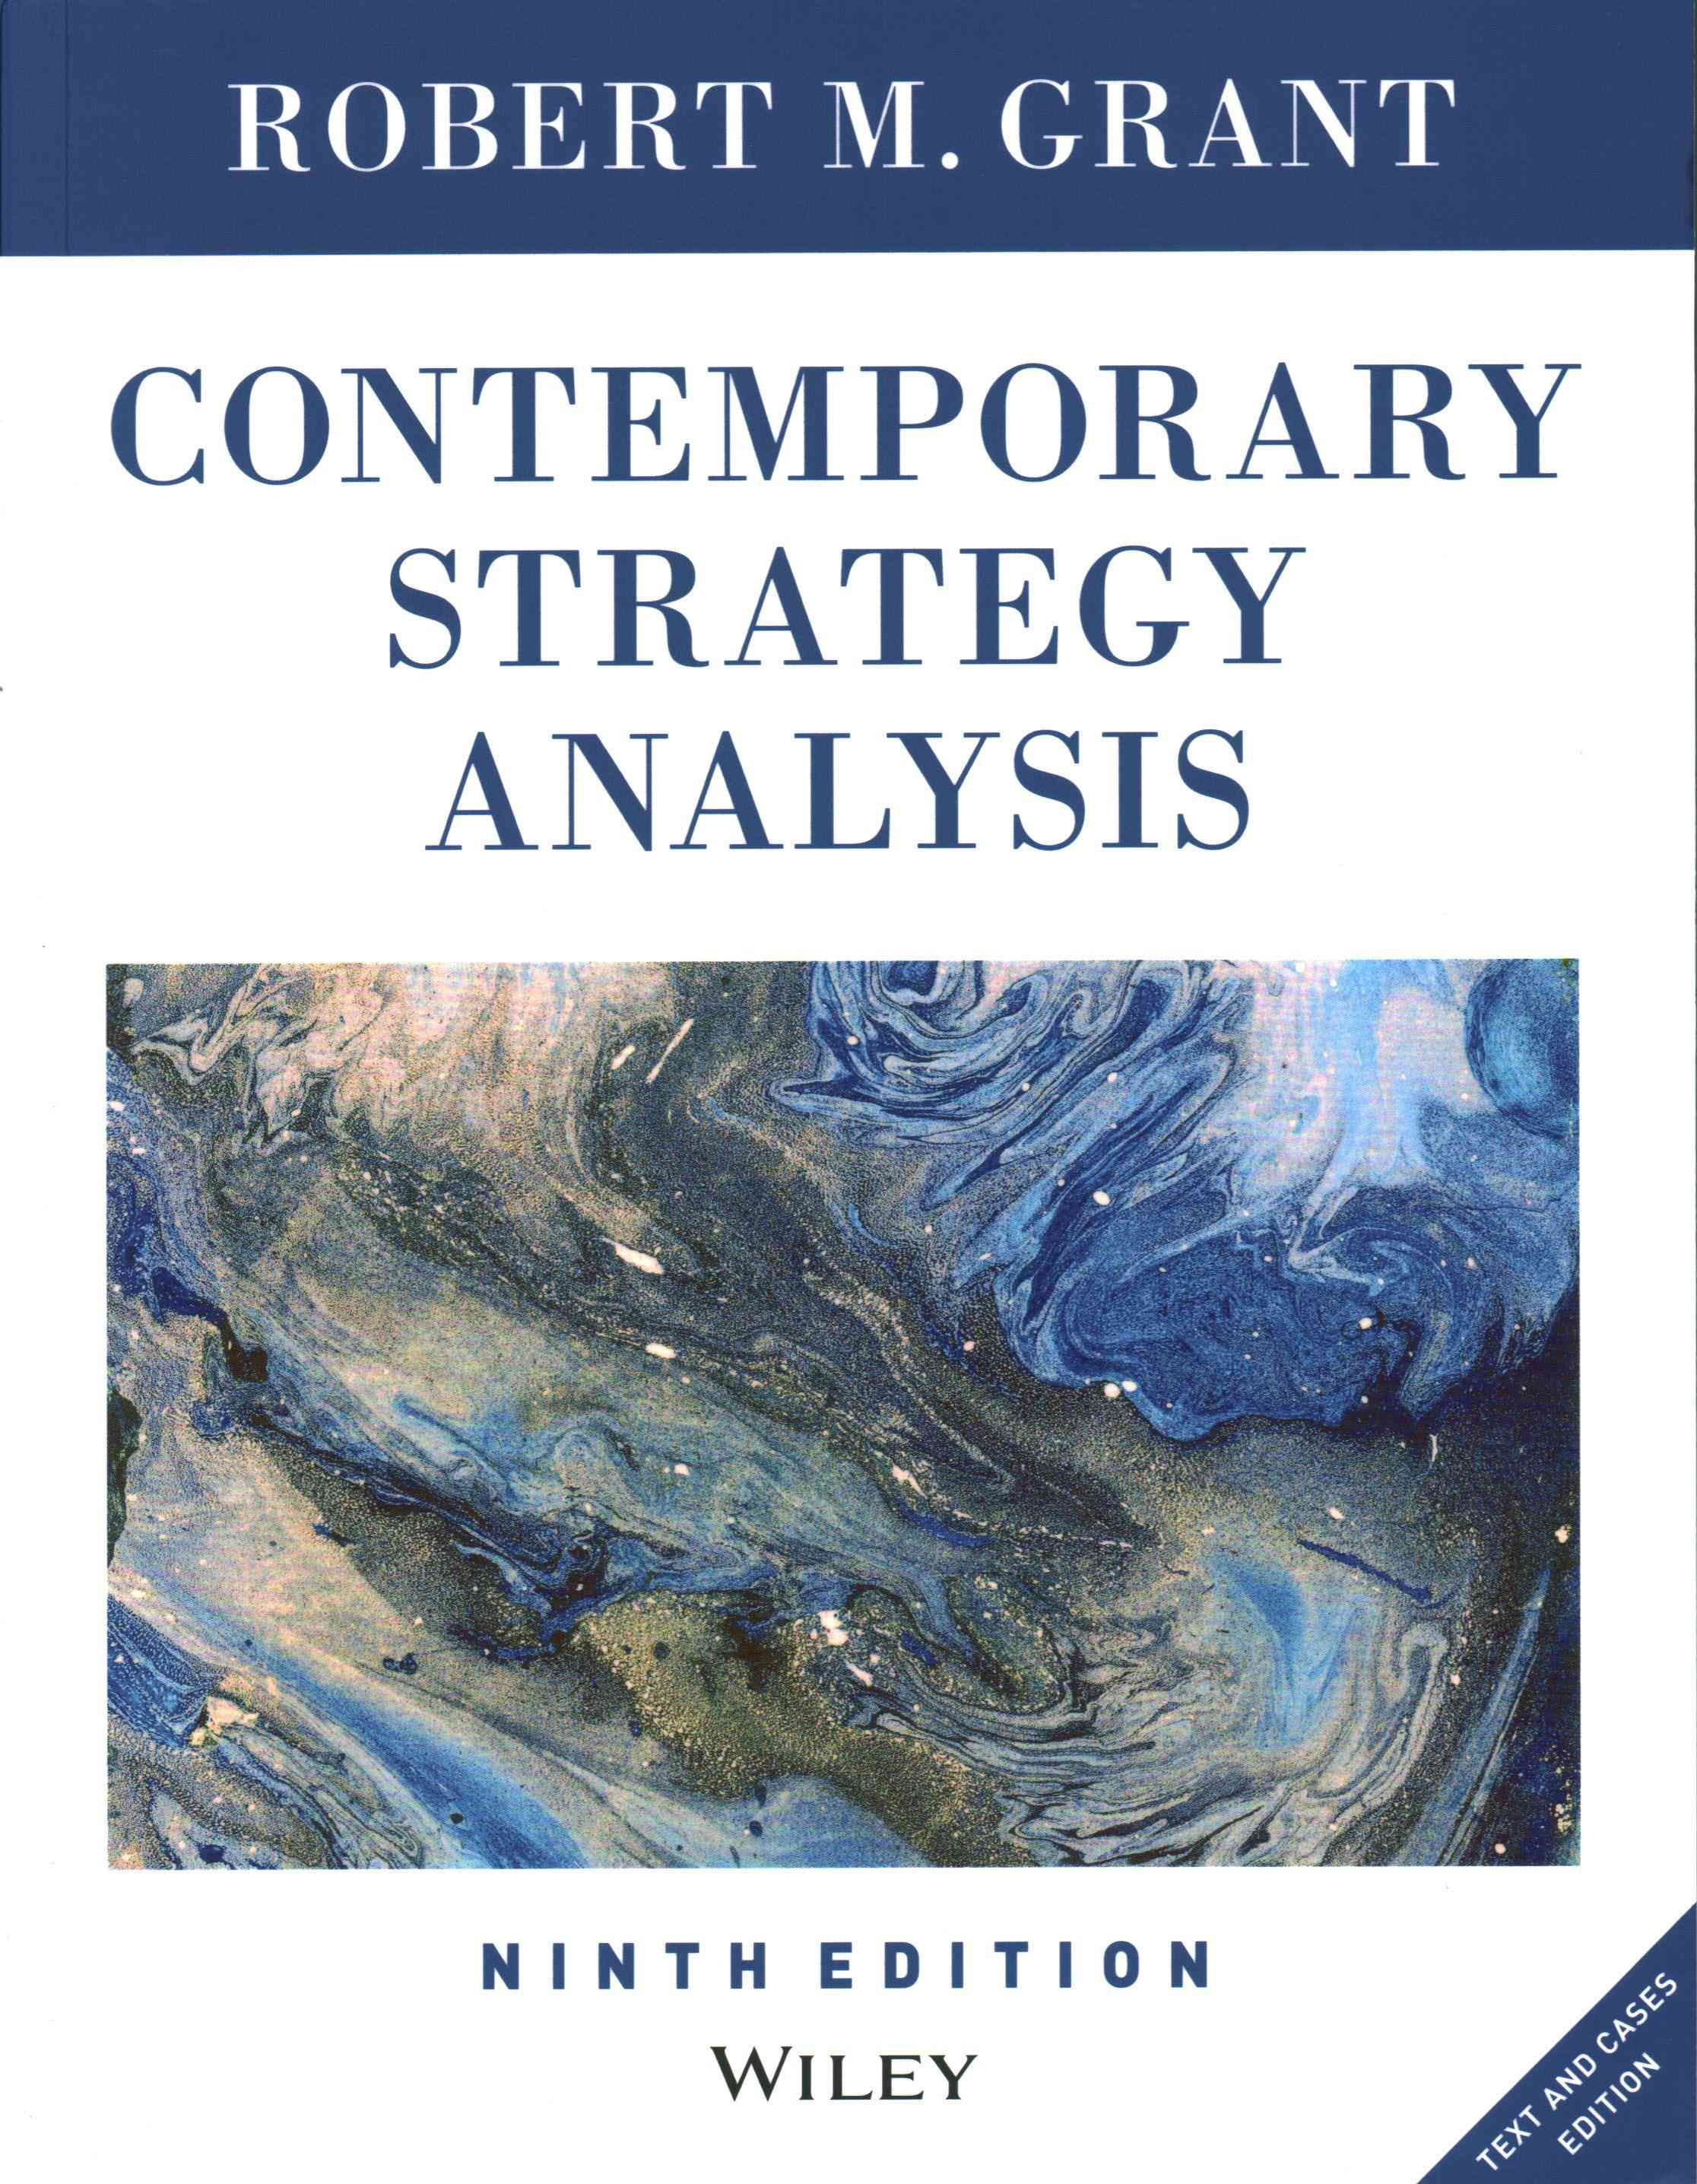 Contemporary Strategy Analysis, Text and Cases Edi tion, 9th Edition